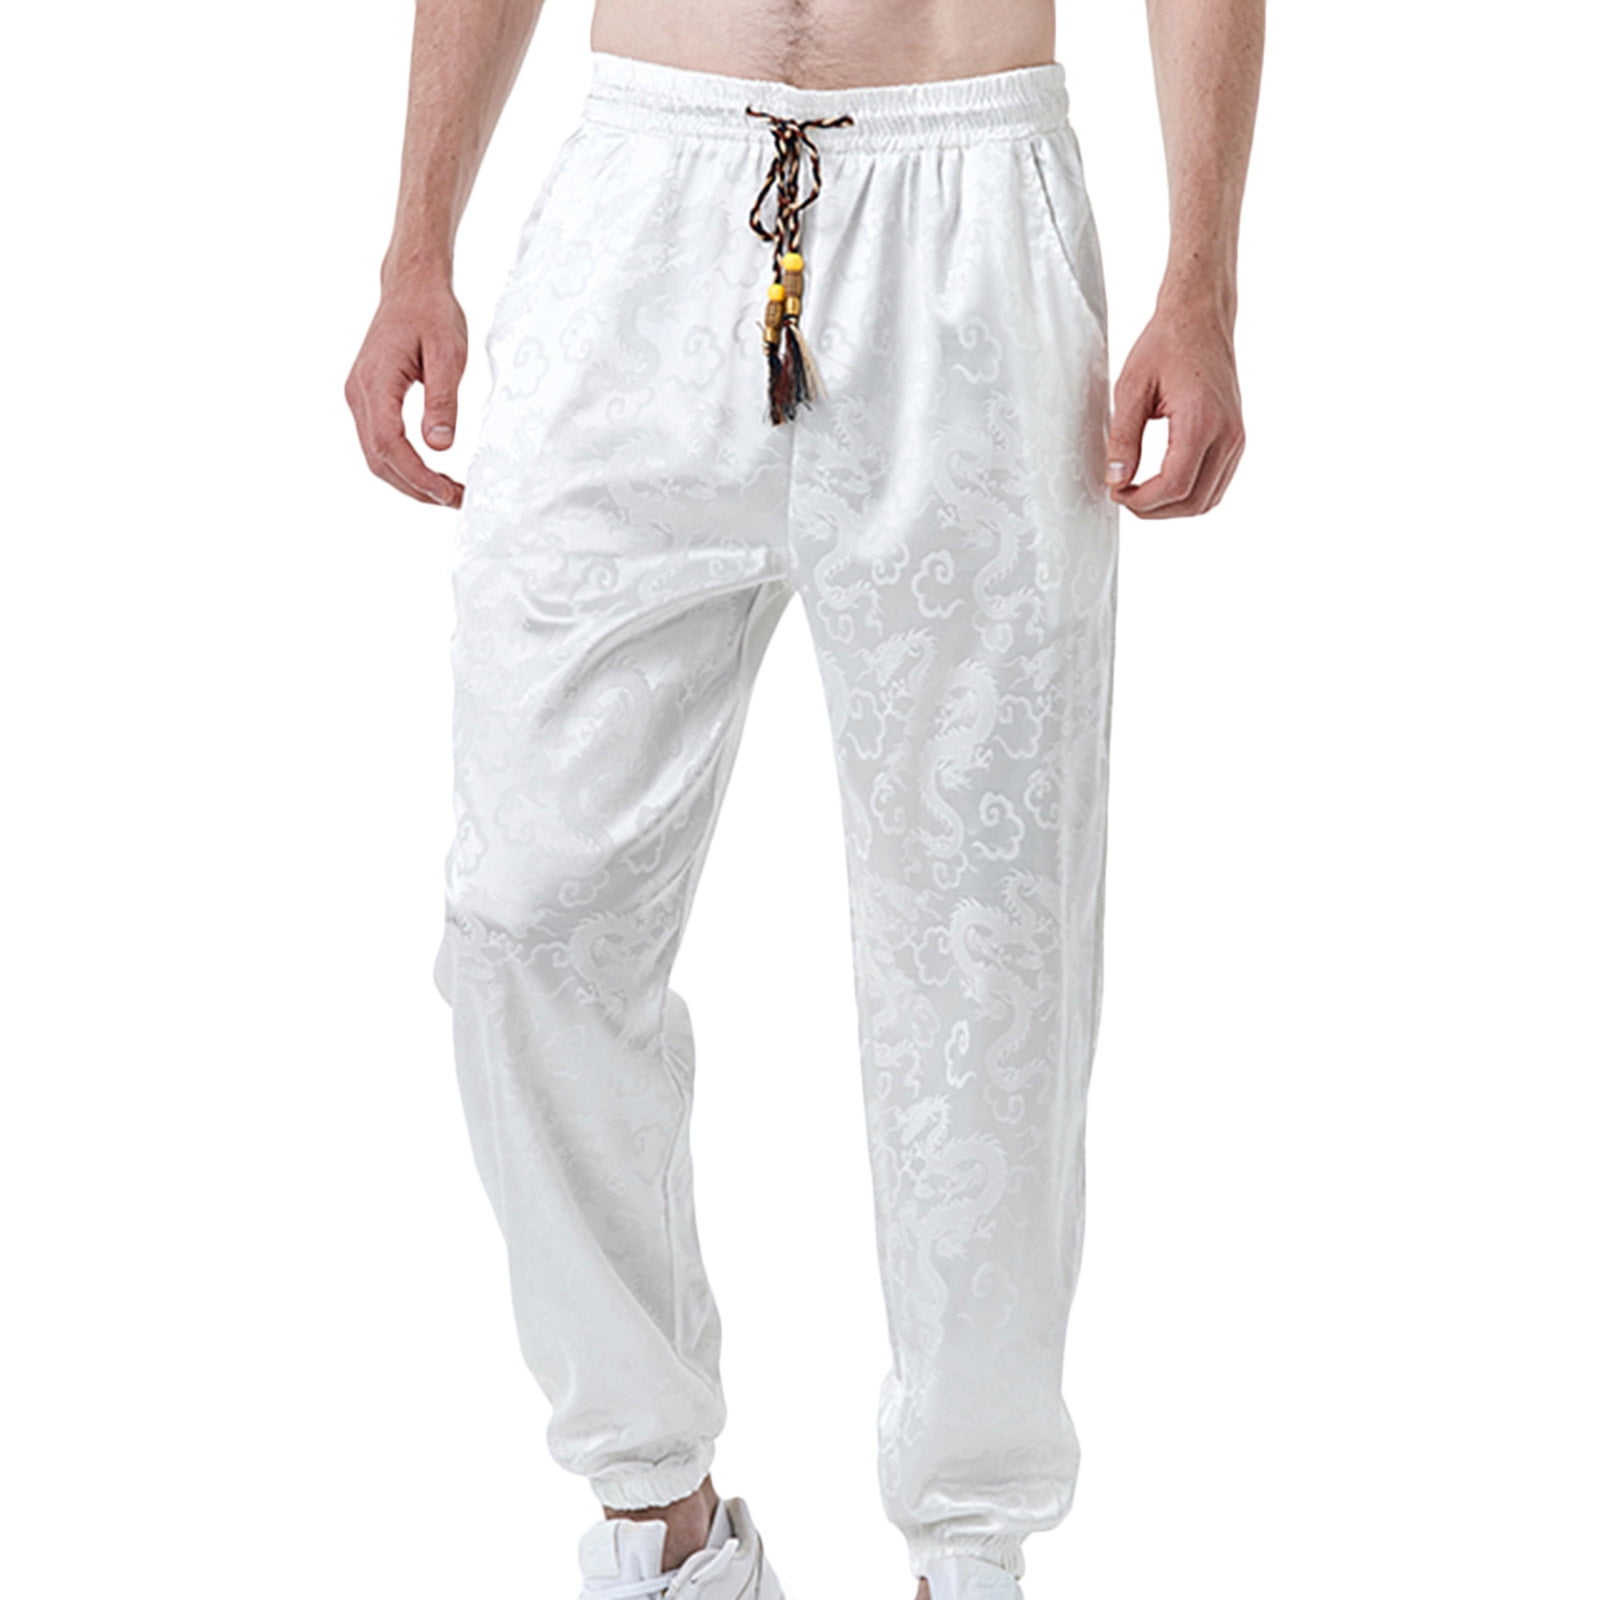 Mens Sweatpants Cargo Pocket Men Casual Fashion Solid Lace-up